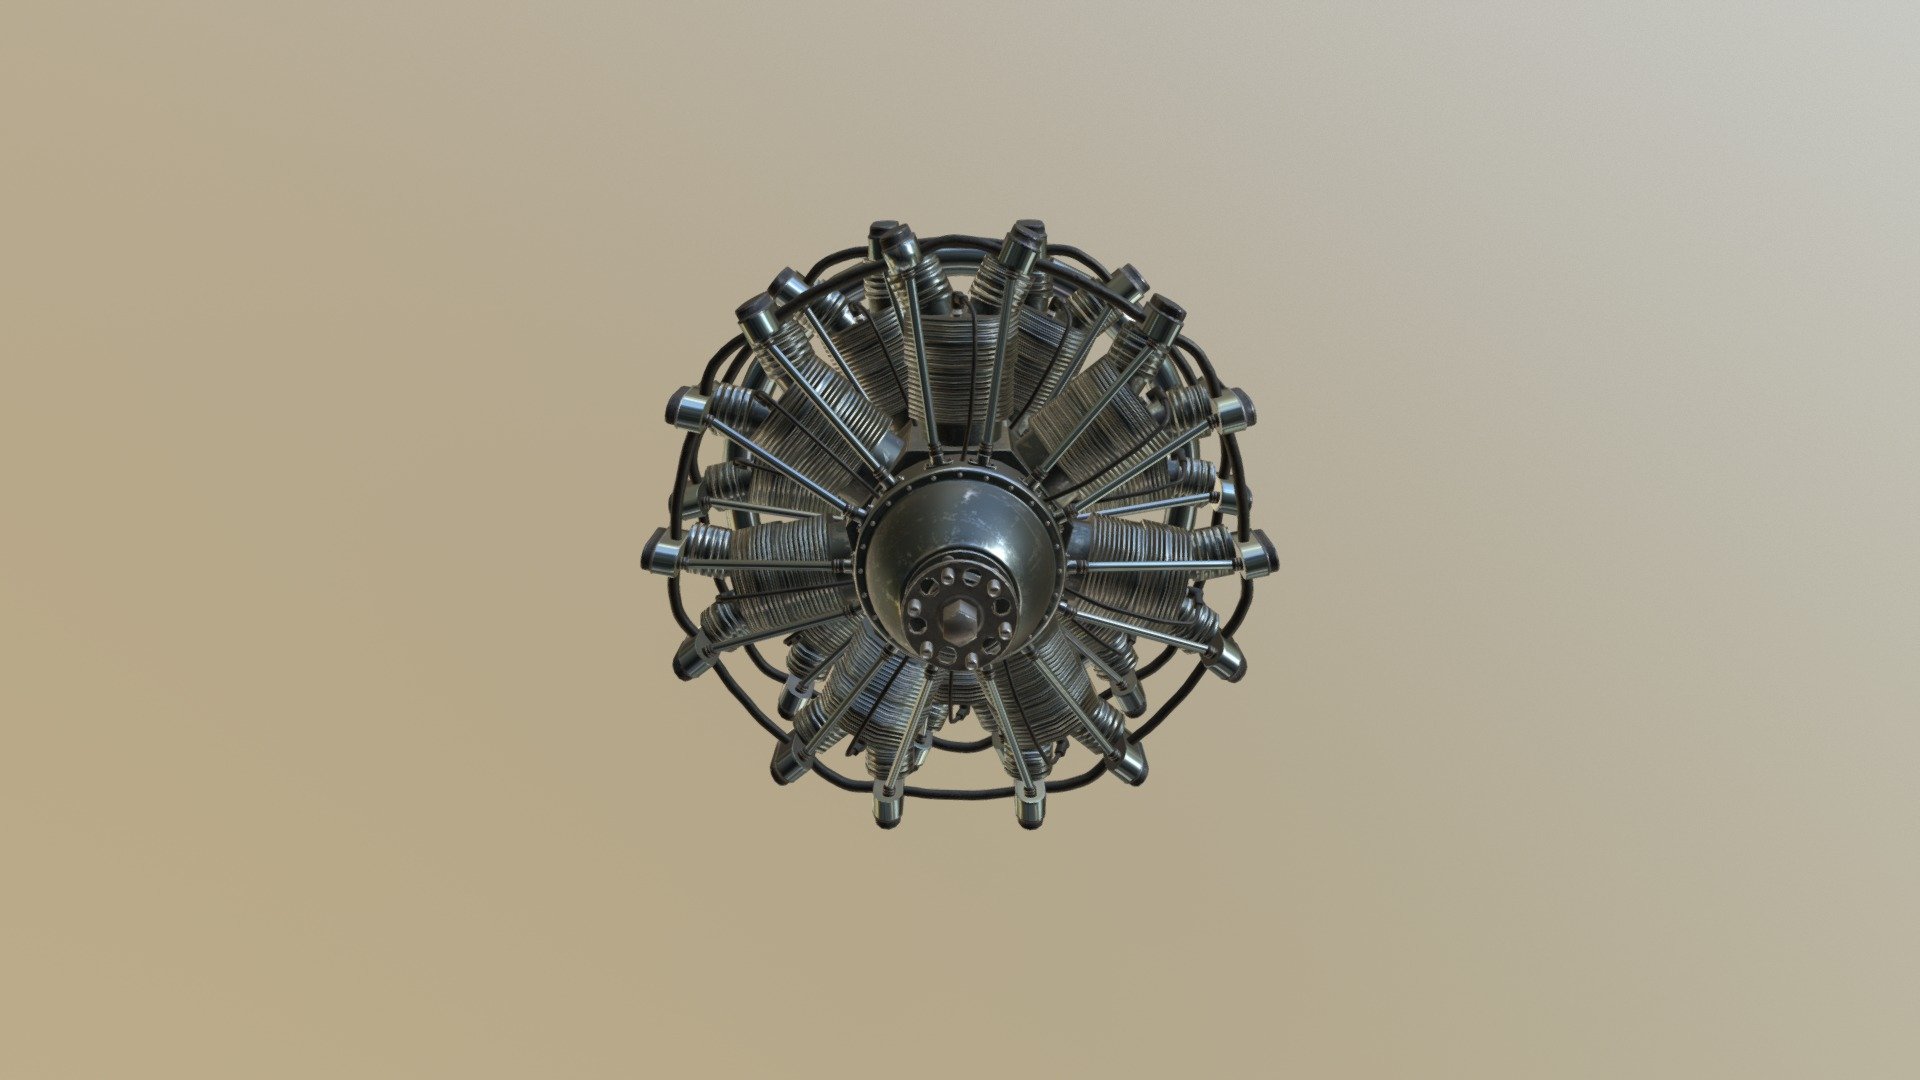 Inspired from the R-2800 airplane engine, will sit in a Vought F4U Corsair model i am making 3d model